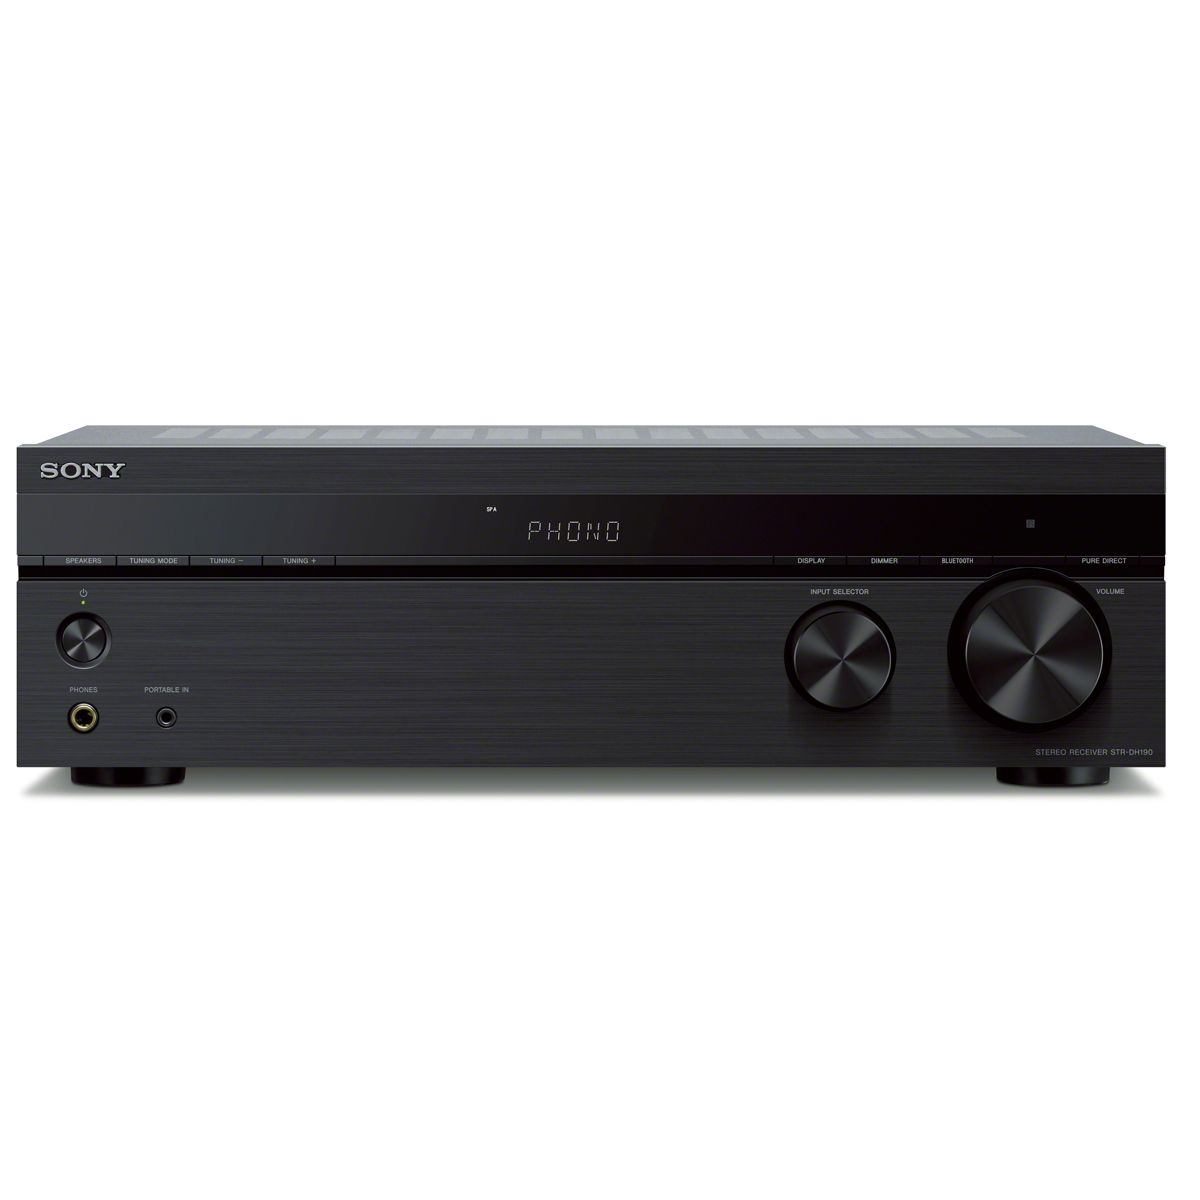 STR-DH190 2-Channel Stereo Receiver - Front View